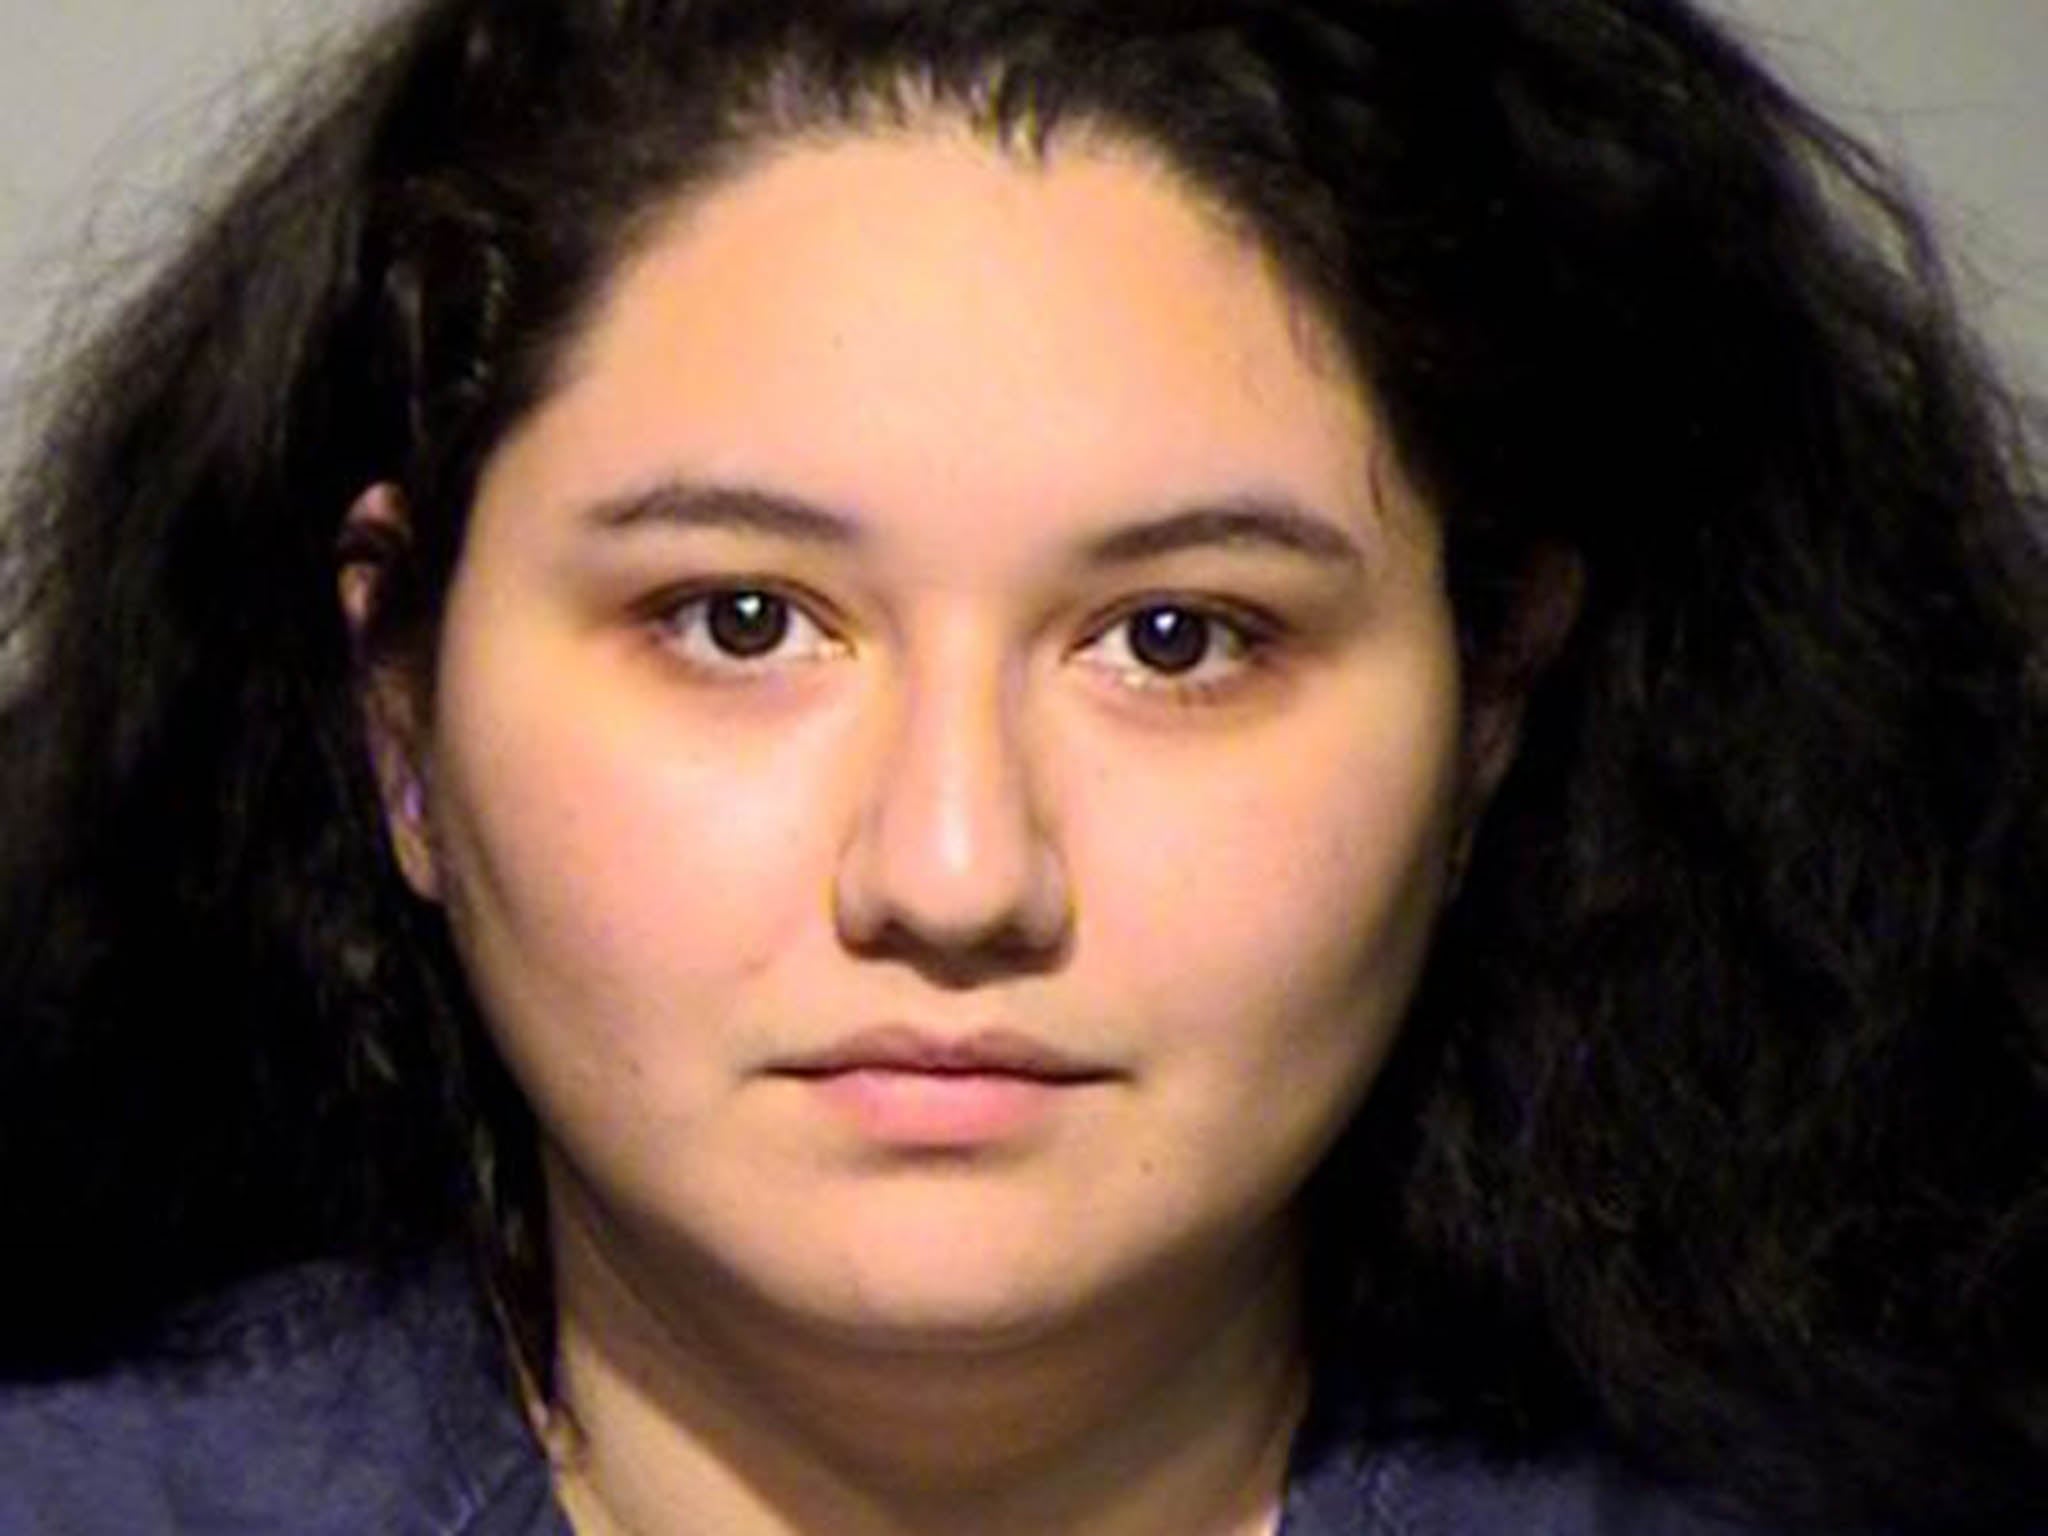 Ms Gonzalez, fifth grade teacher at Atlas Preparatory Academy, a Choice school, reportedly told police she wanted the child to see that someone cared